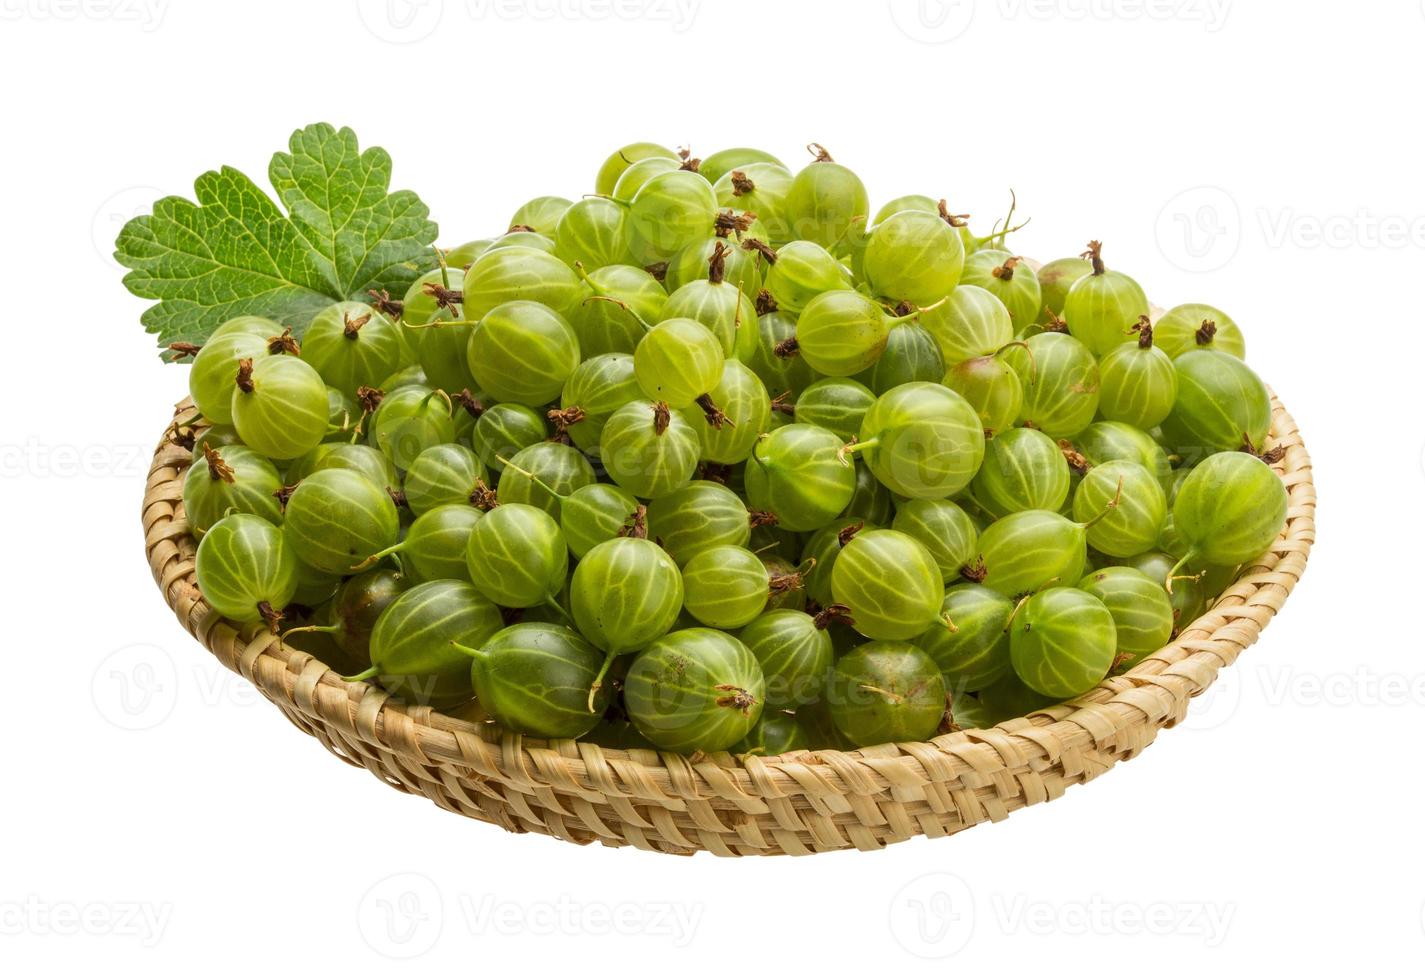 Gooseberry in a basket on white background photo